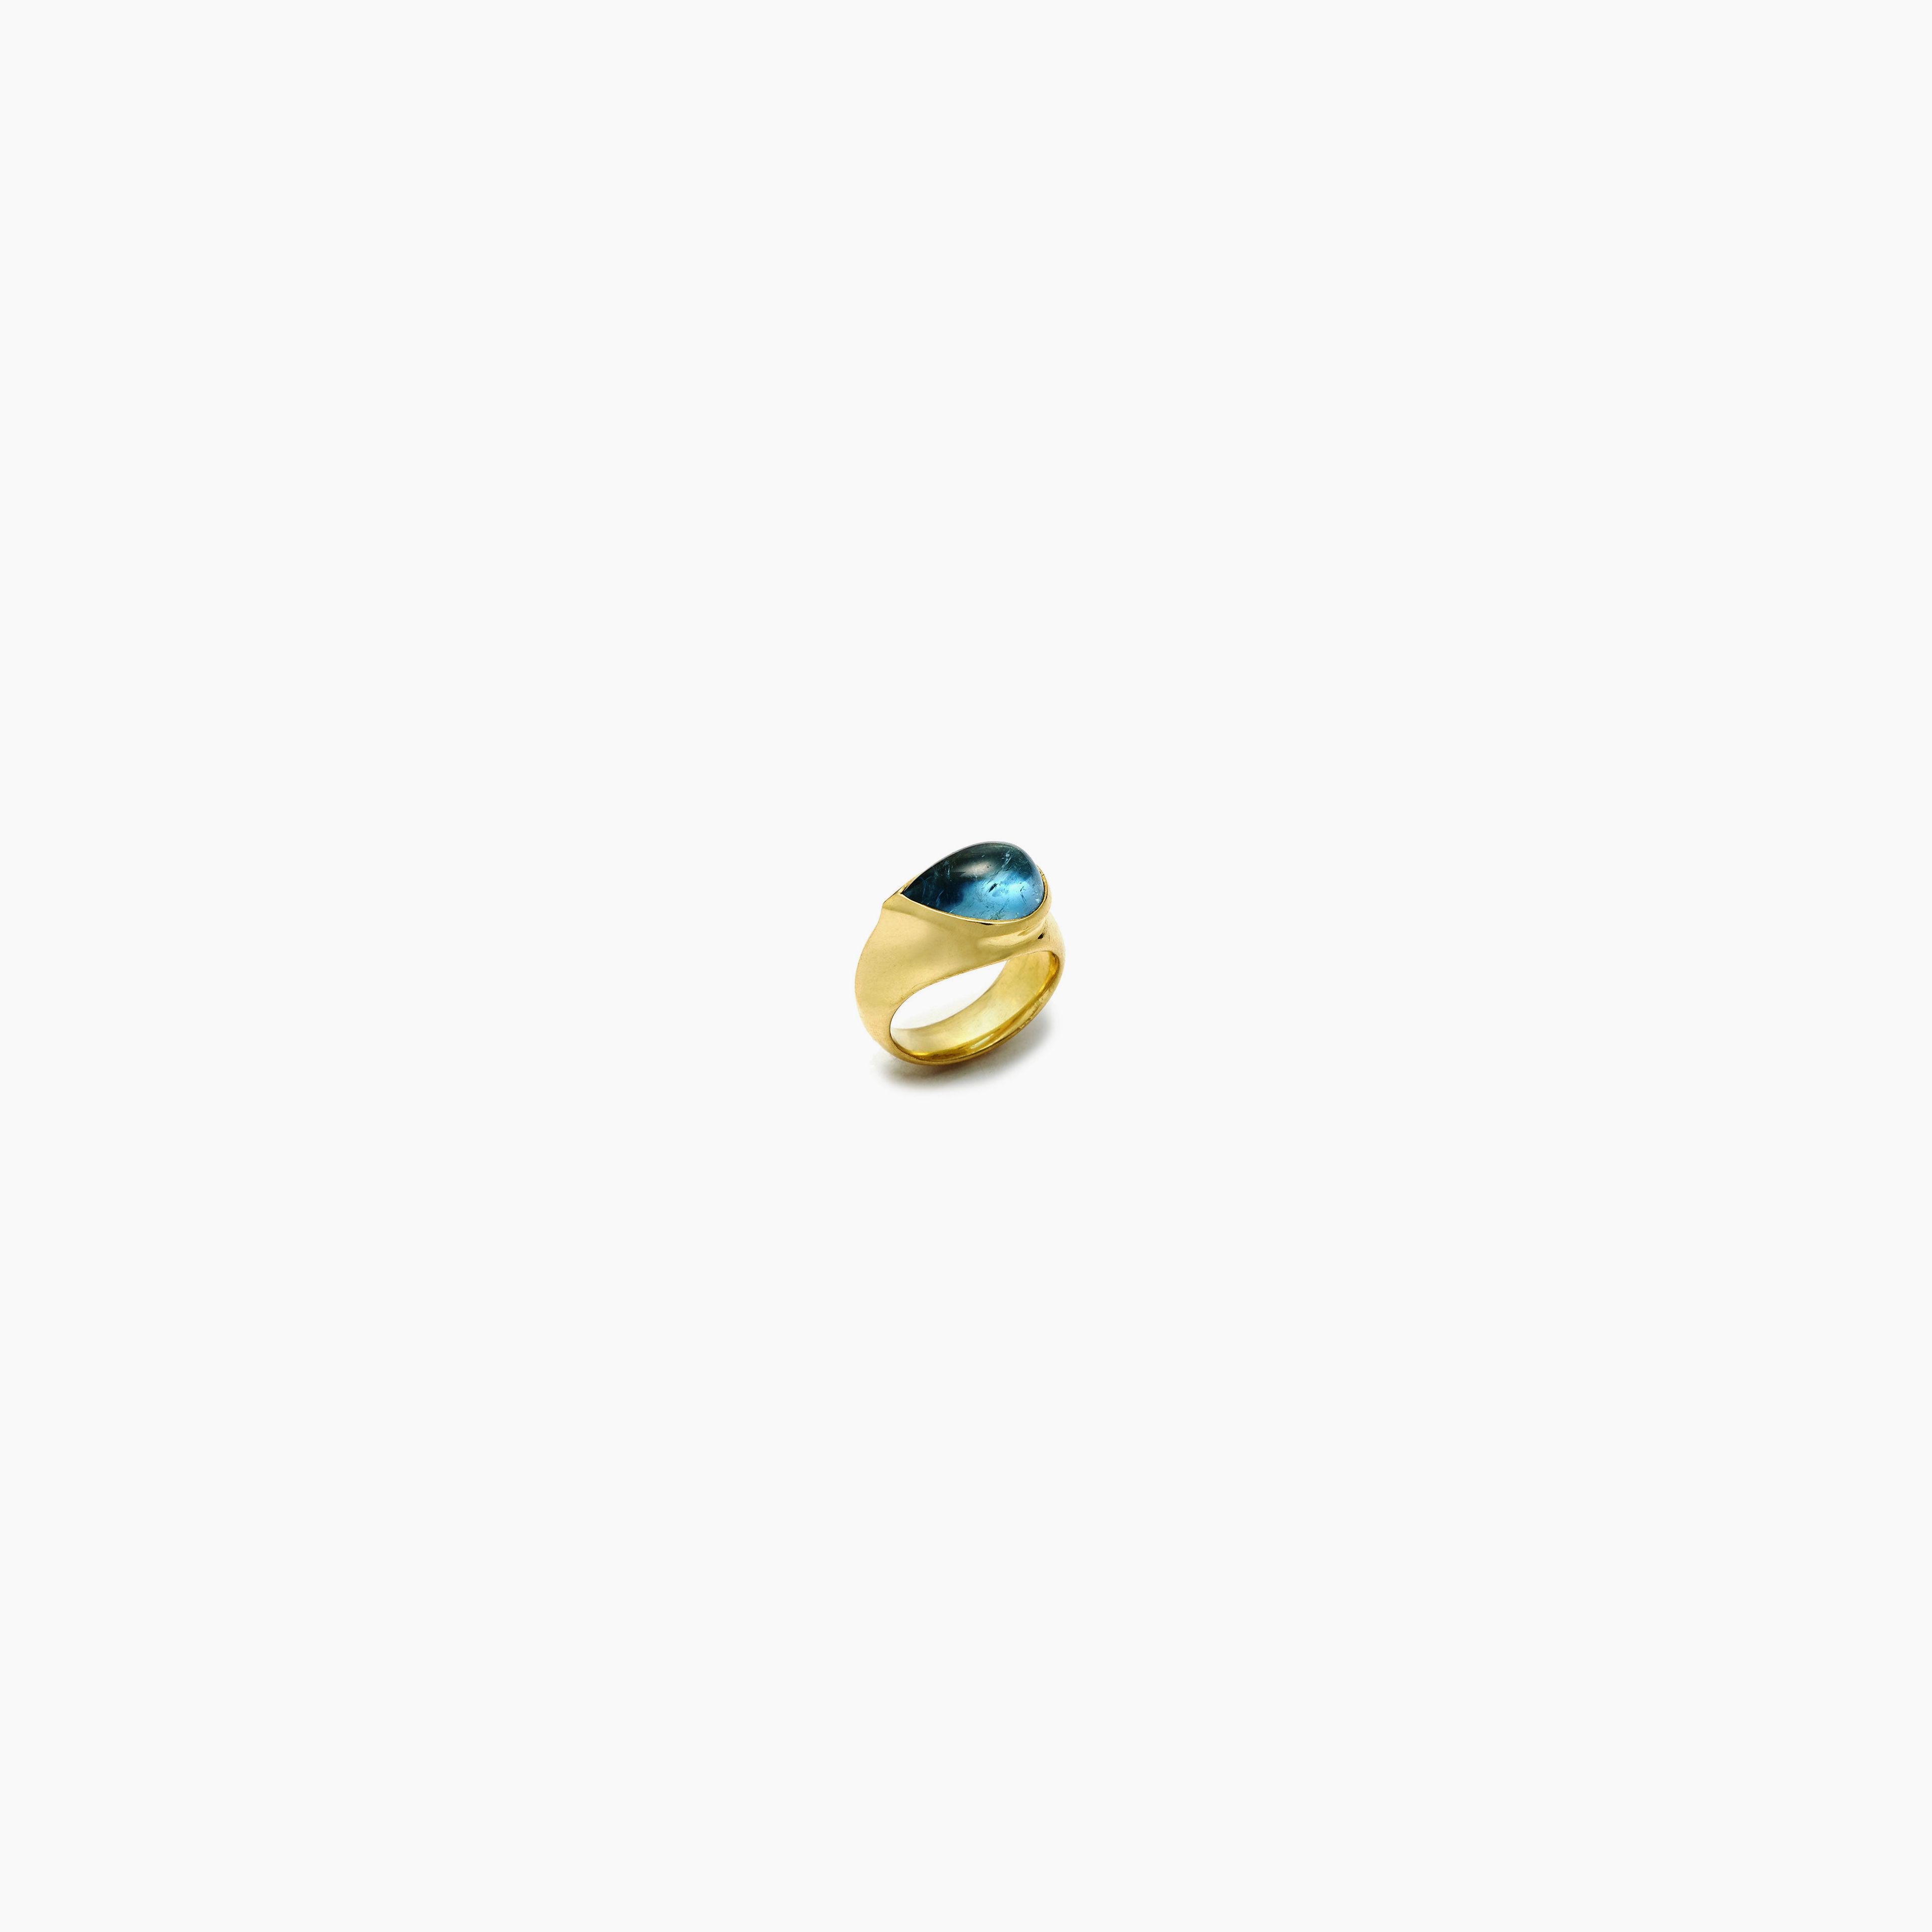 Pear-Shaped Aquamarine Ring set in 18kt Gold